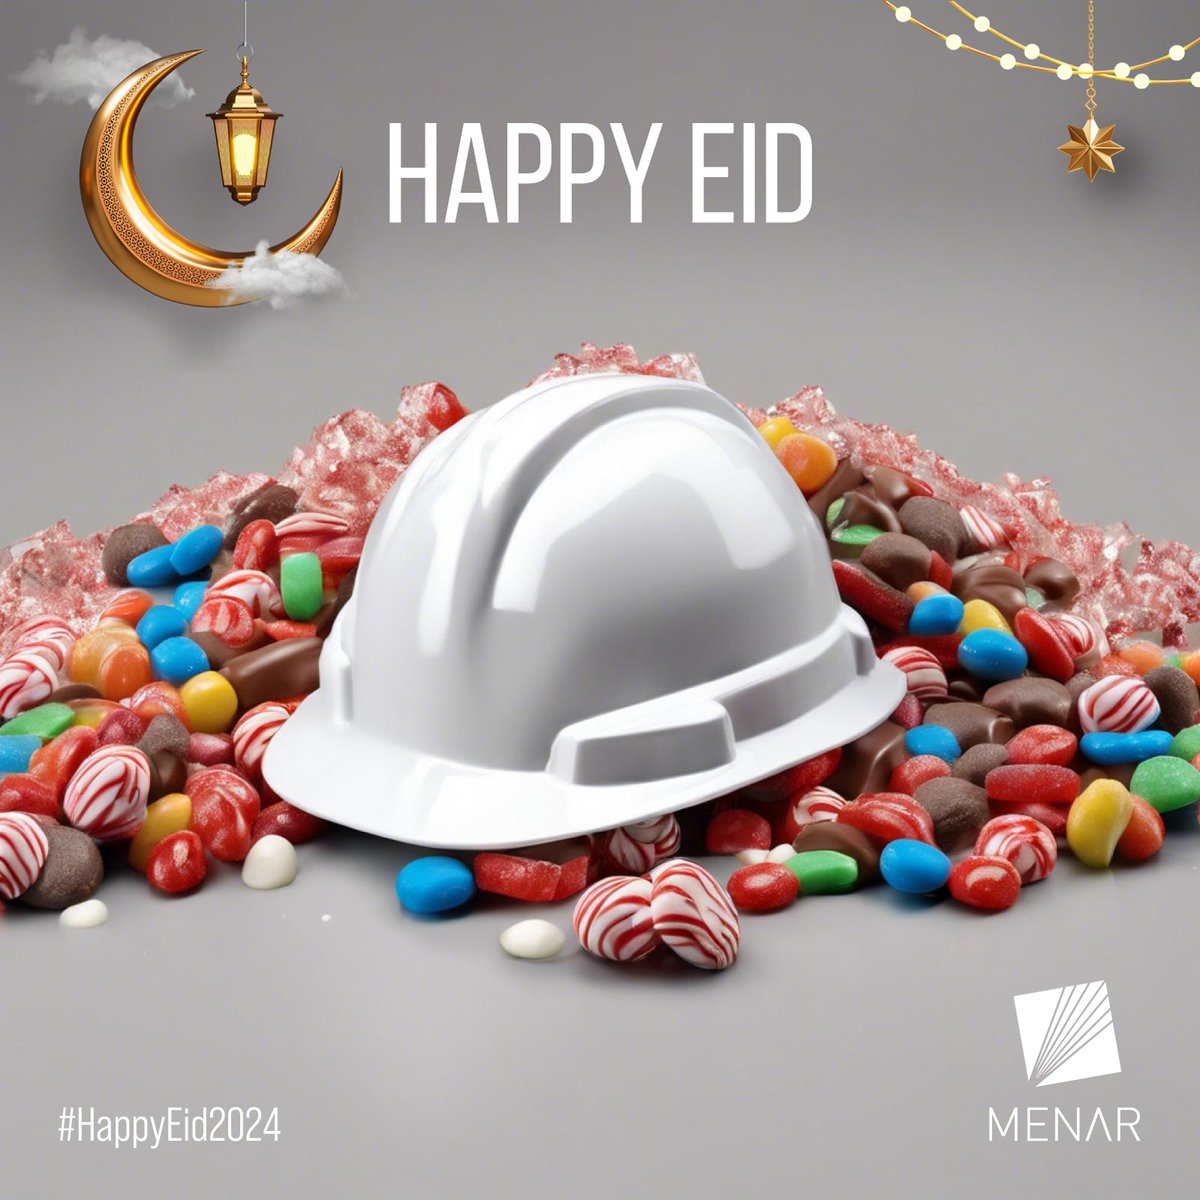 Have a happy and prosperous #Eid from #menar, #canyoncoal, #sitatunga, #ZAC and #kangra #Eid2024